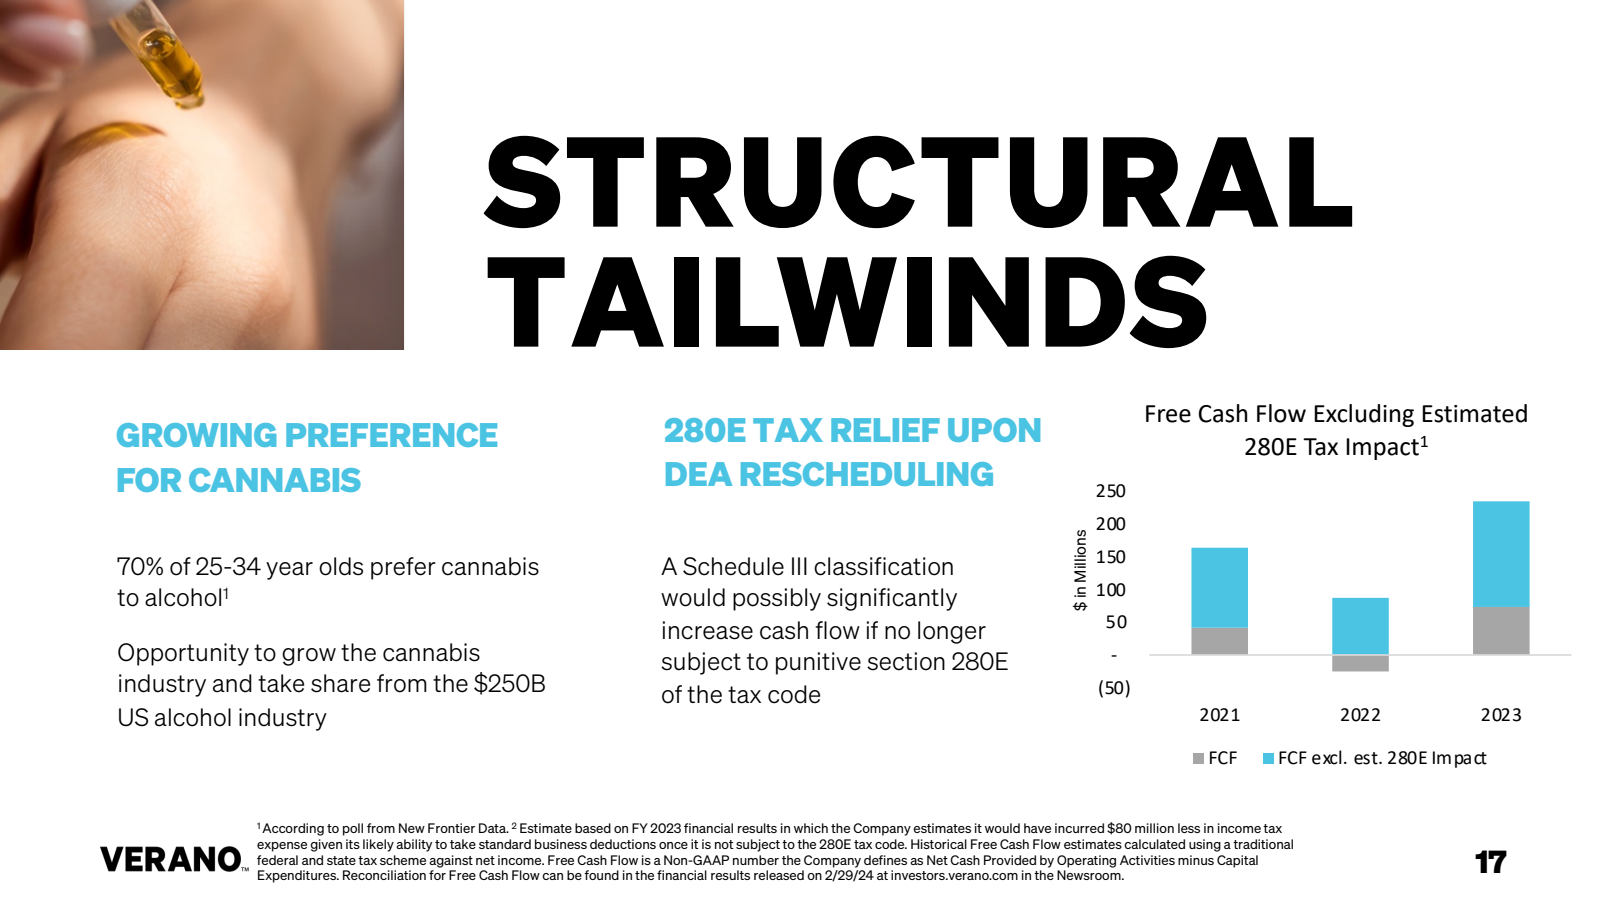 STRUCTURAL TAILWINDS